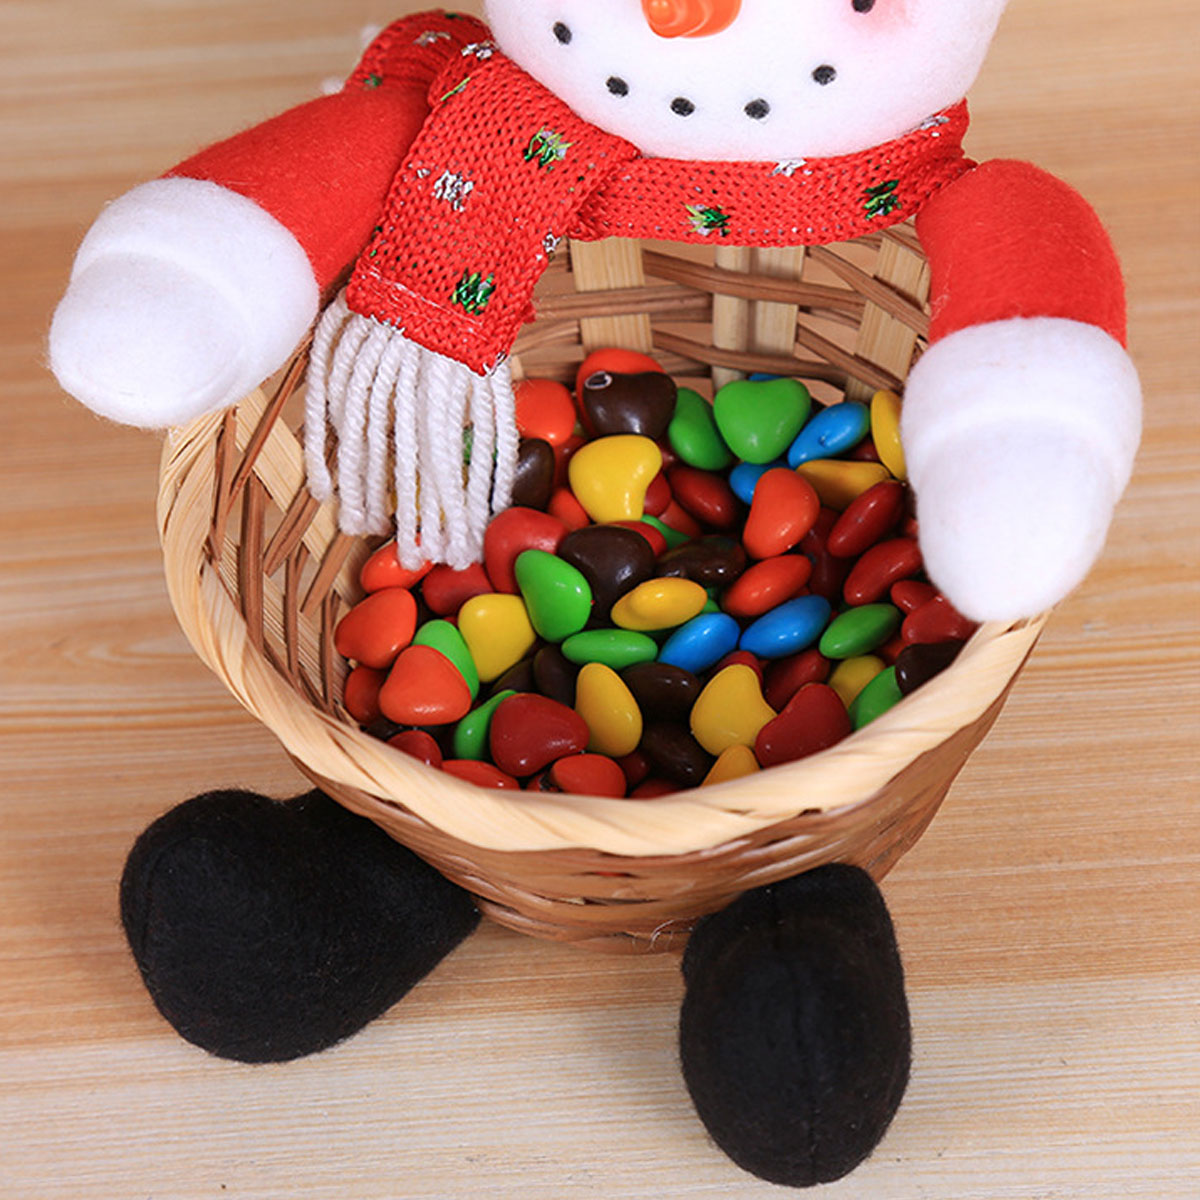 5-Types-Christmas-Candy-Storage-Basket-Santa-Claus-Home-Decorations-Ornaments-1477556-9